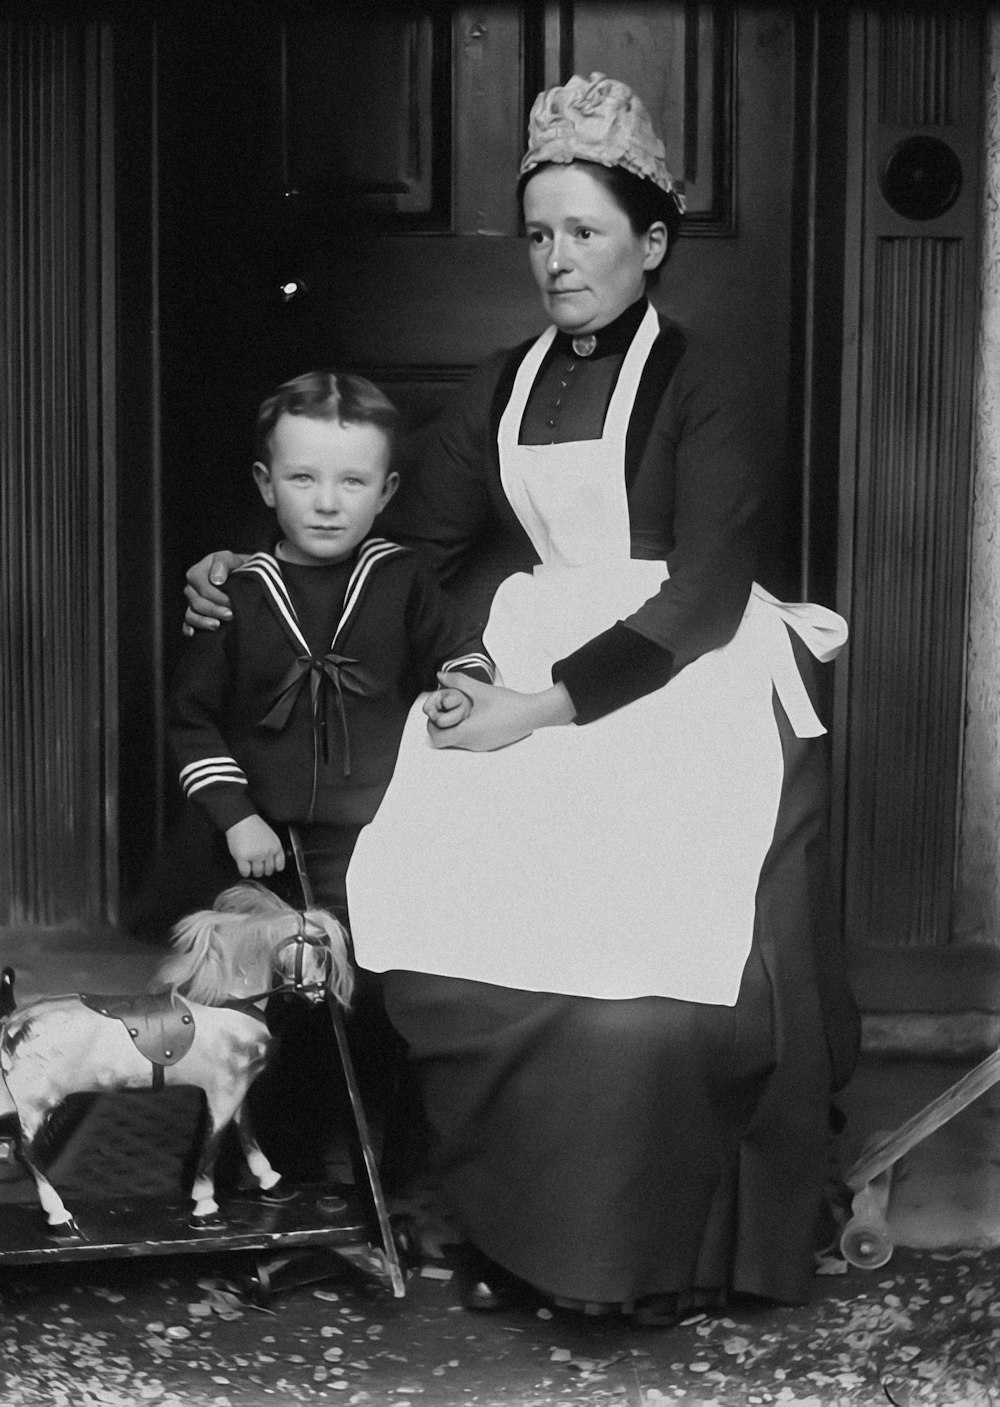 an old photo of a woman and a child